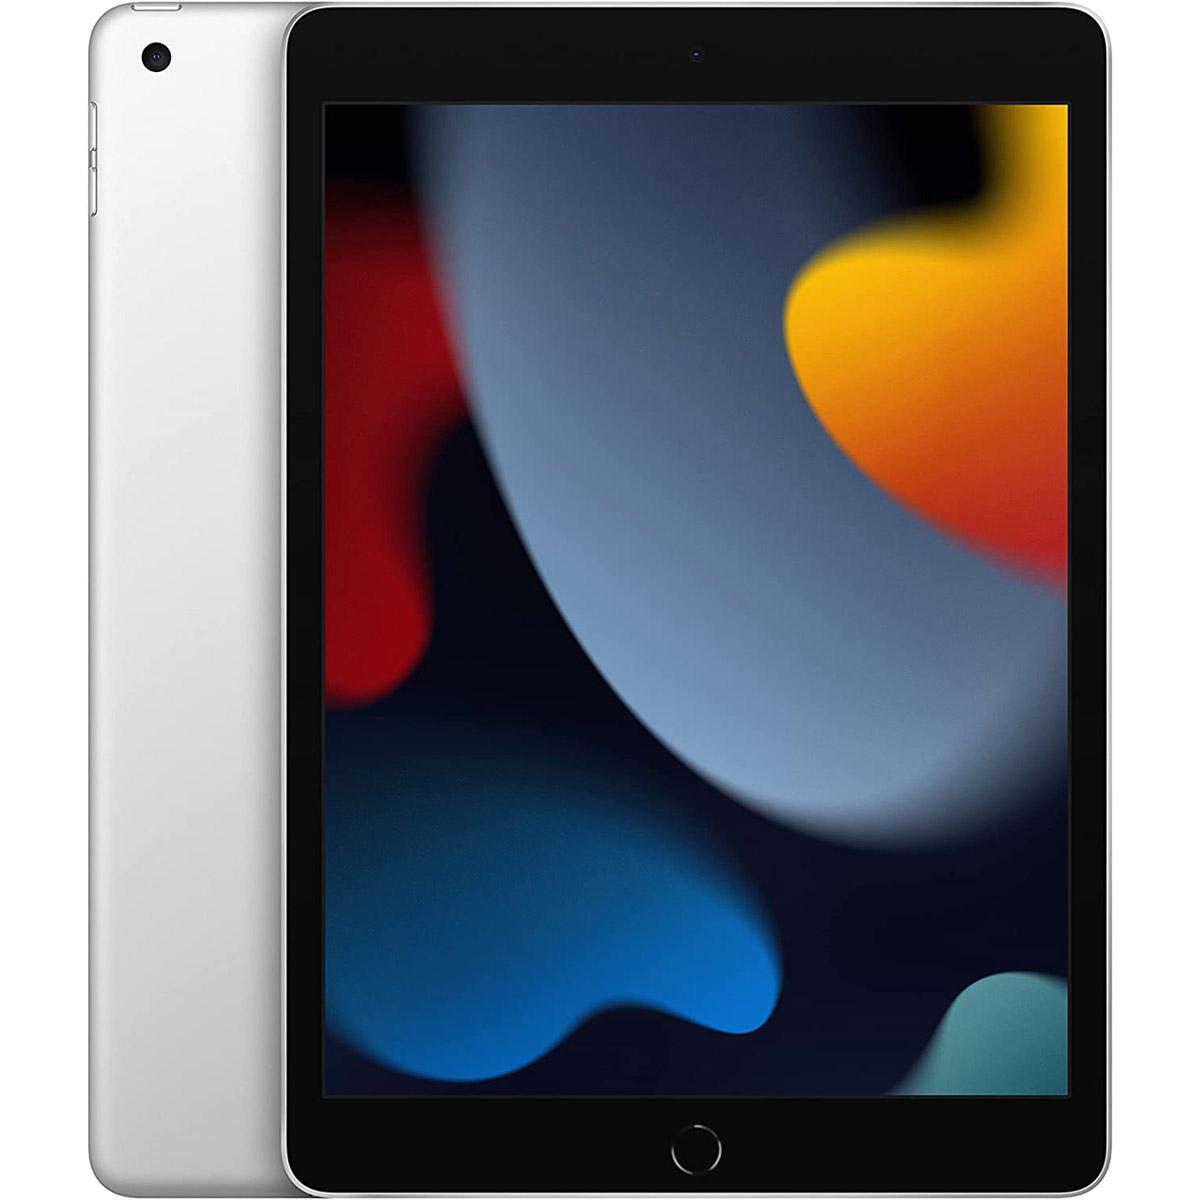 Apple iPad 10.2in 64GB Wifi Tablet for $309 Shipped